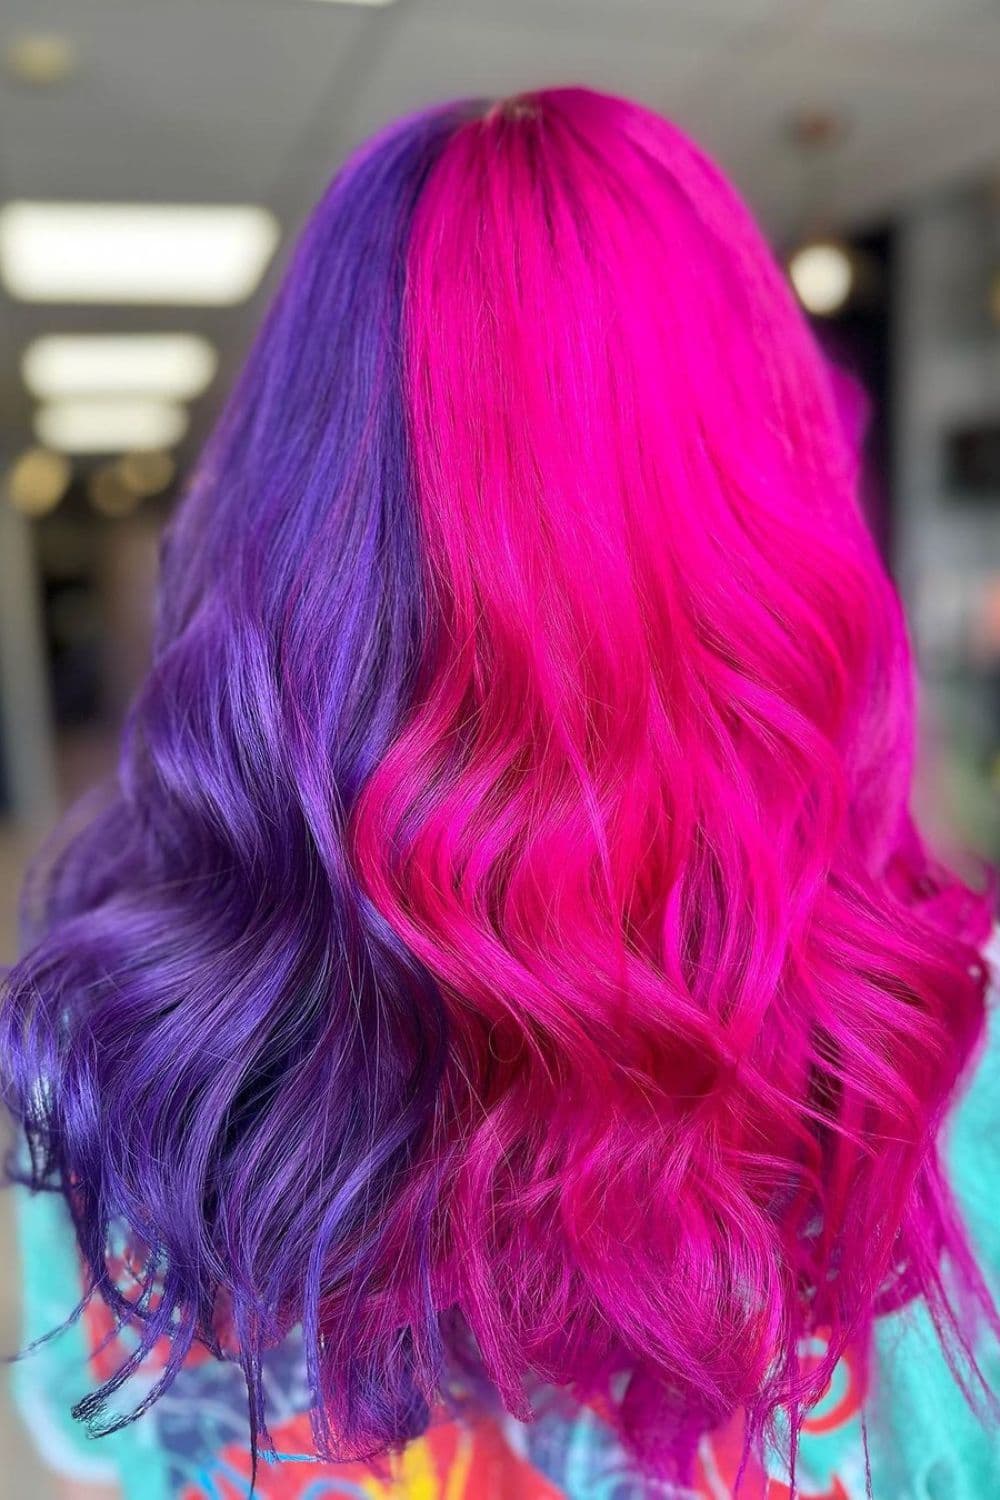 A woman with long purple and pink split-dye hair.